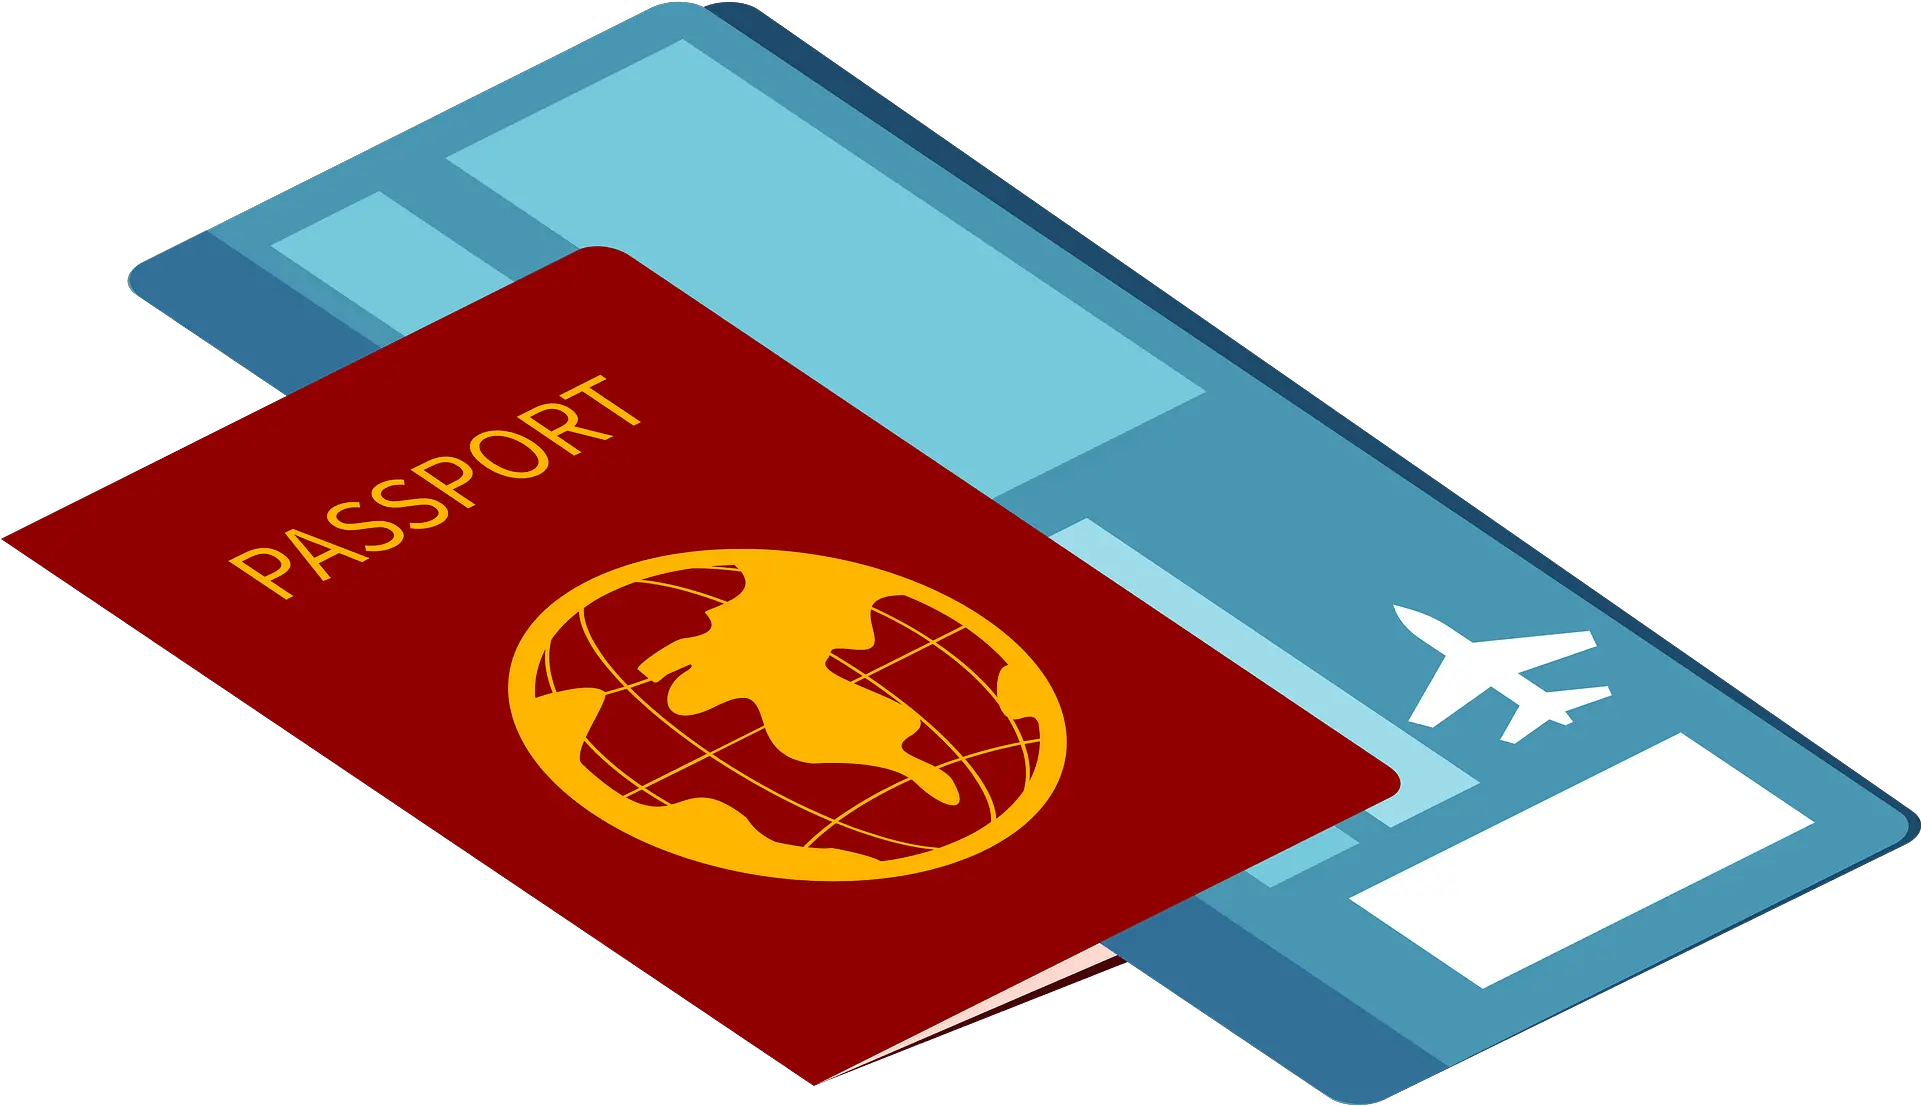 Airline Ticket And Passport Clipart Free Download Passport Air Ticket Png Ticket Transparent